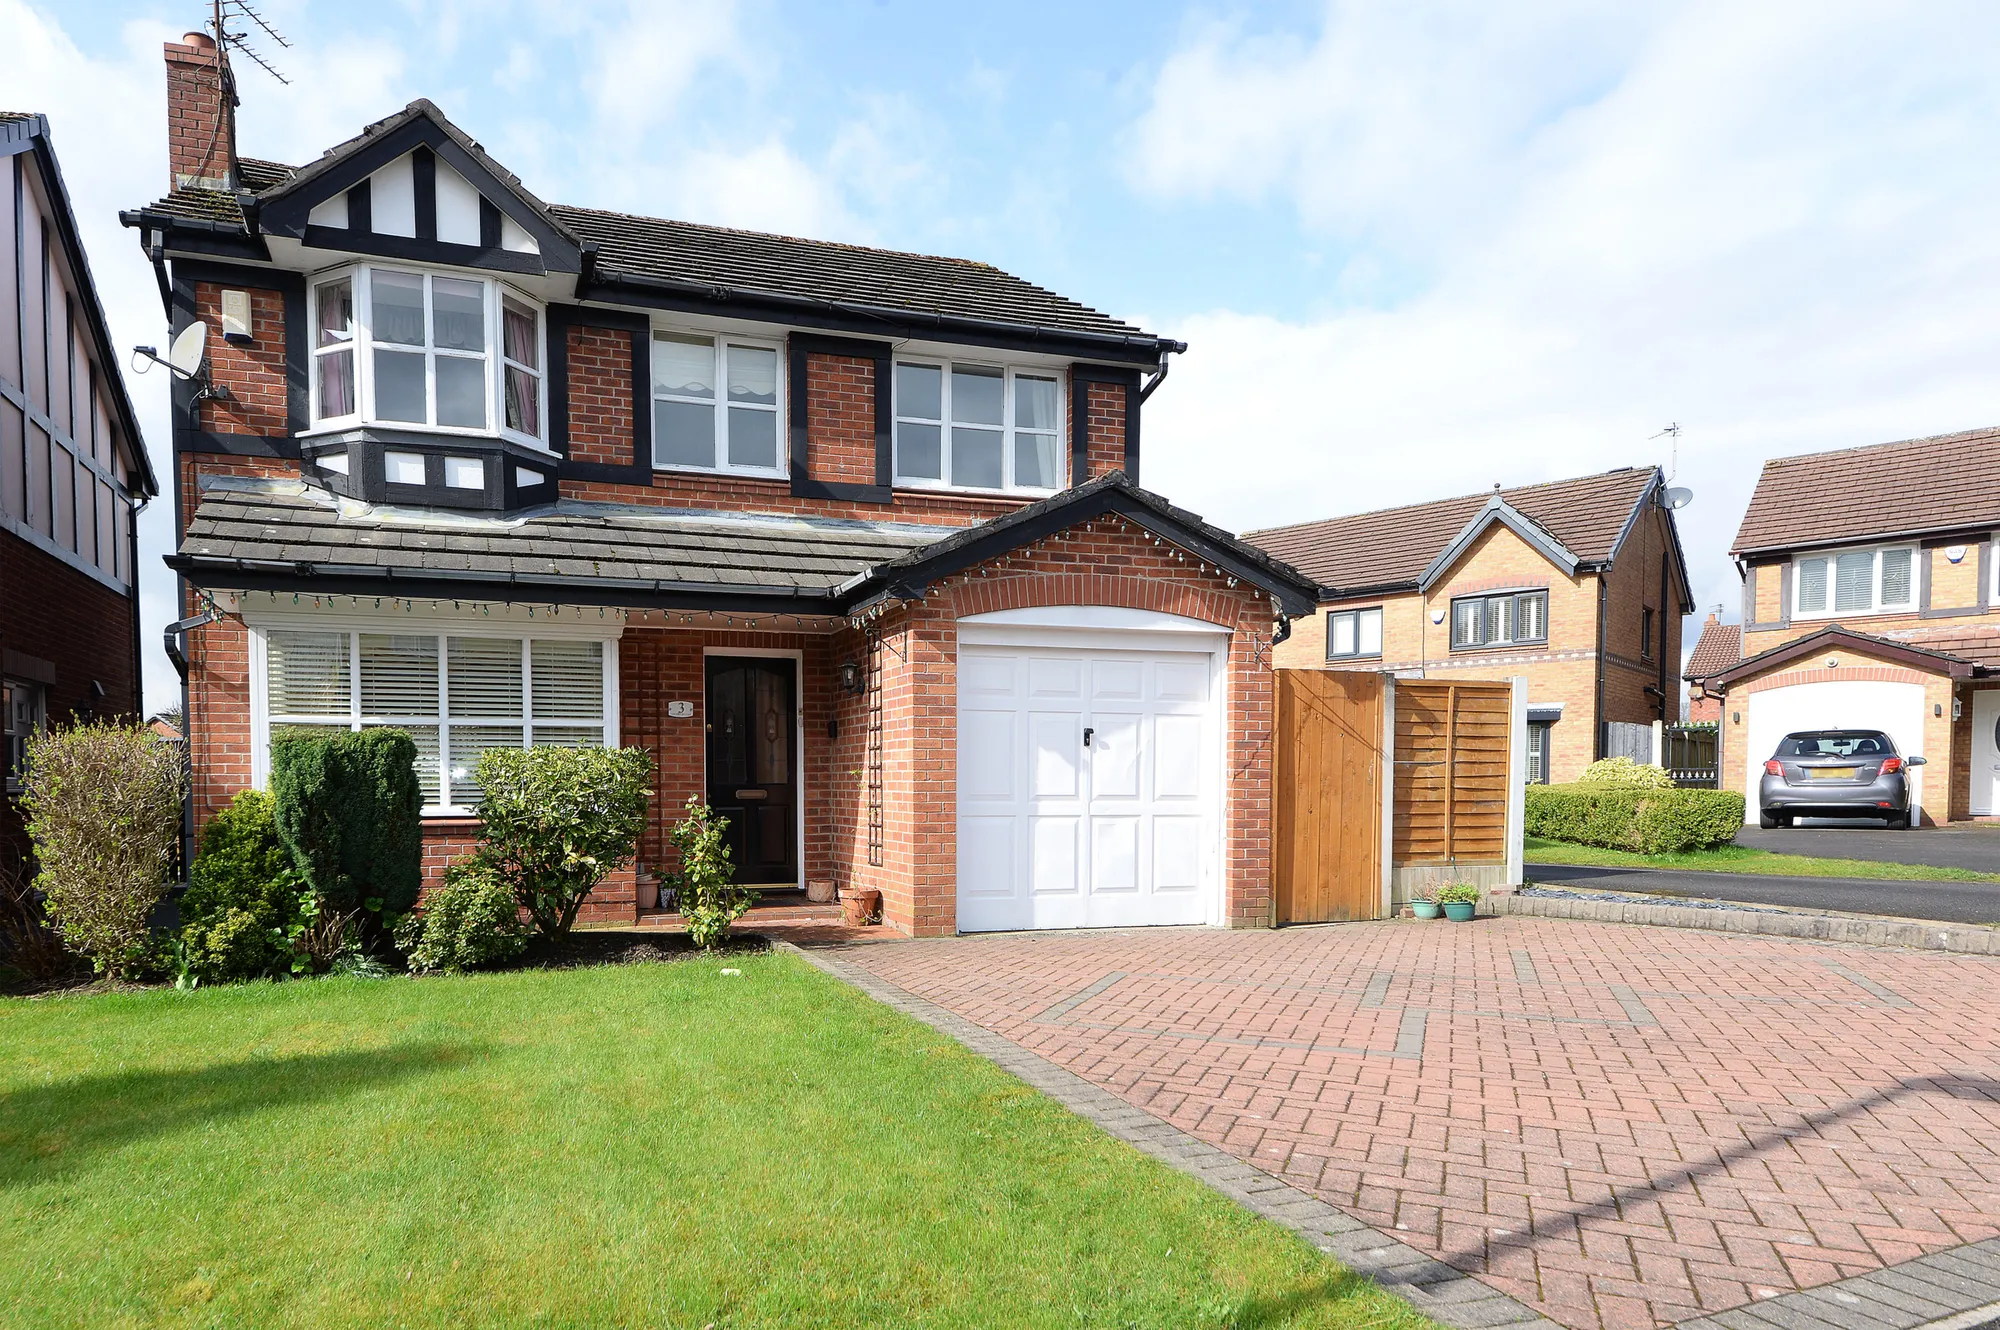 4 bed detached house for sale in Canterbury Close, Dukinfield - Property Image 1